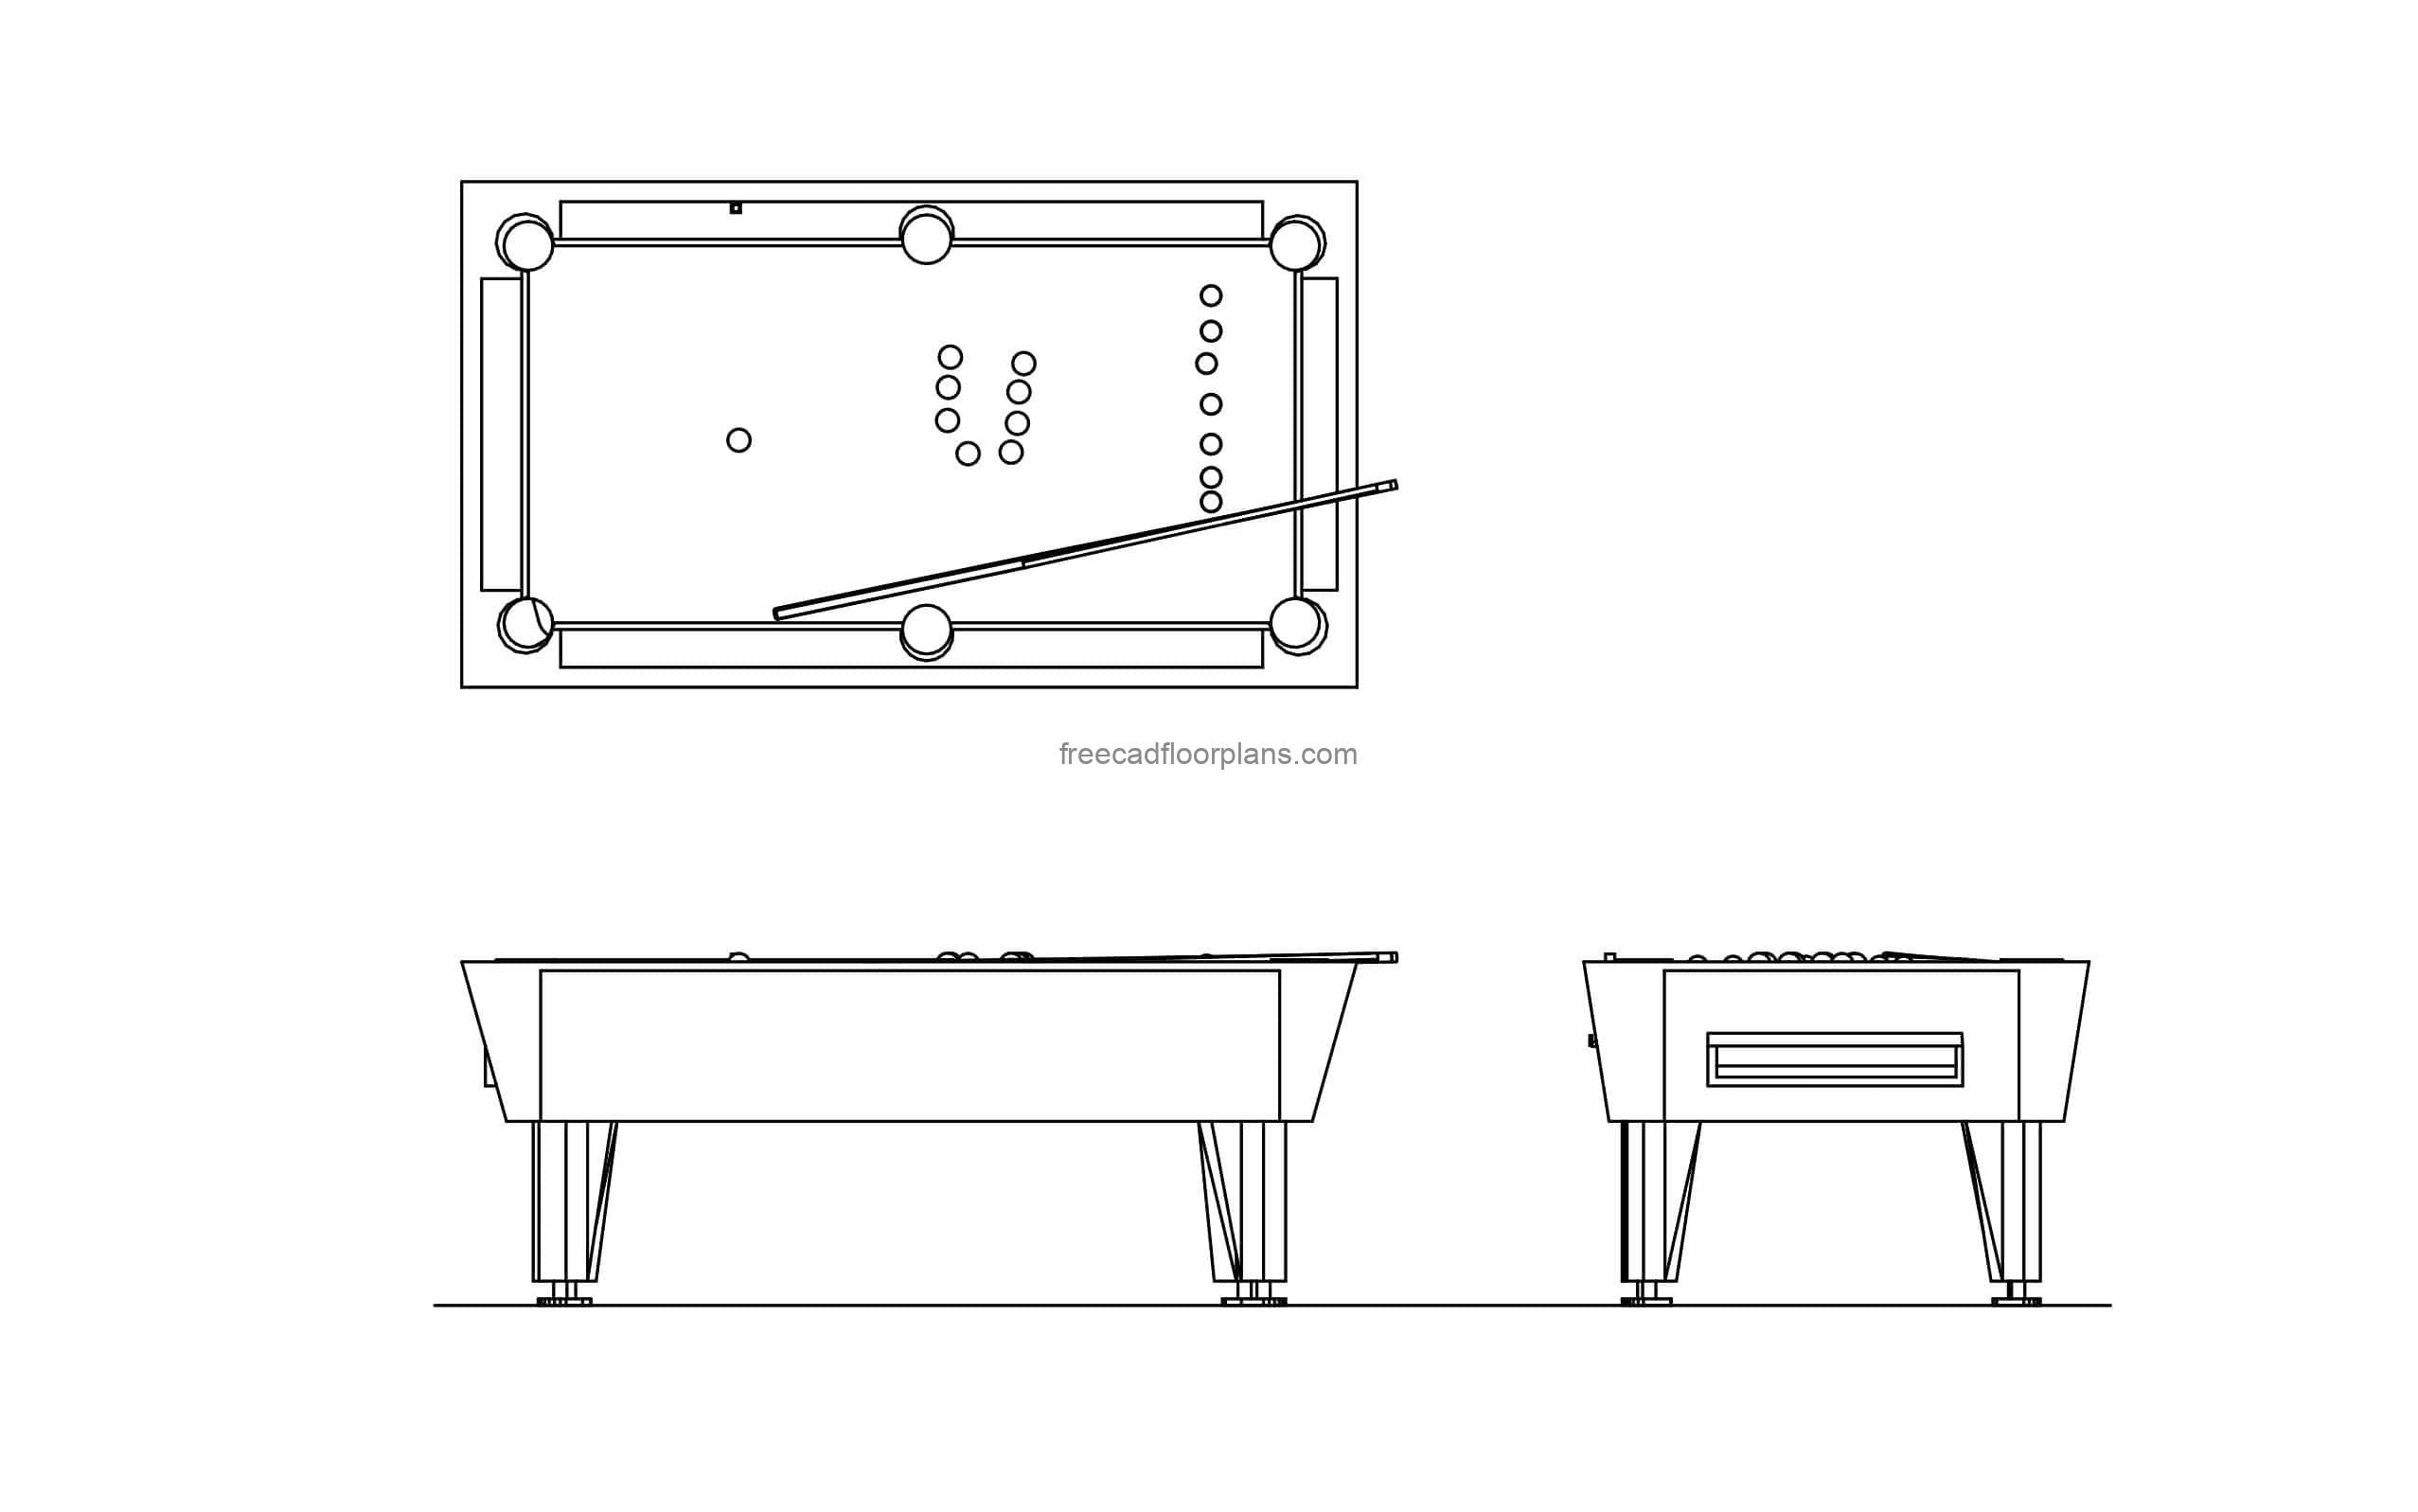 drawing of a billiard table in dwg format elevations,plan and side biews cad block